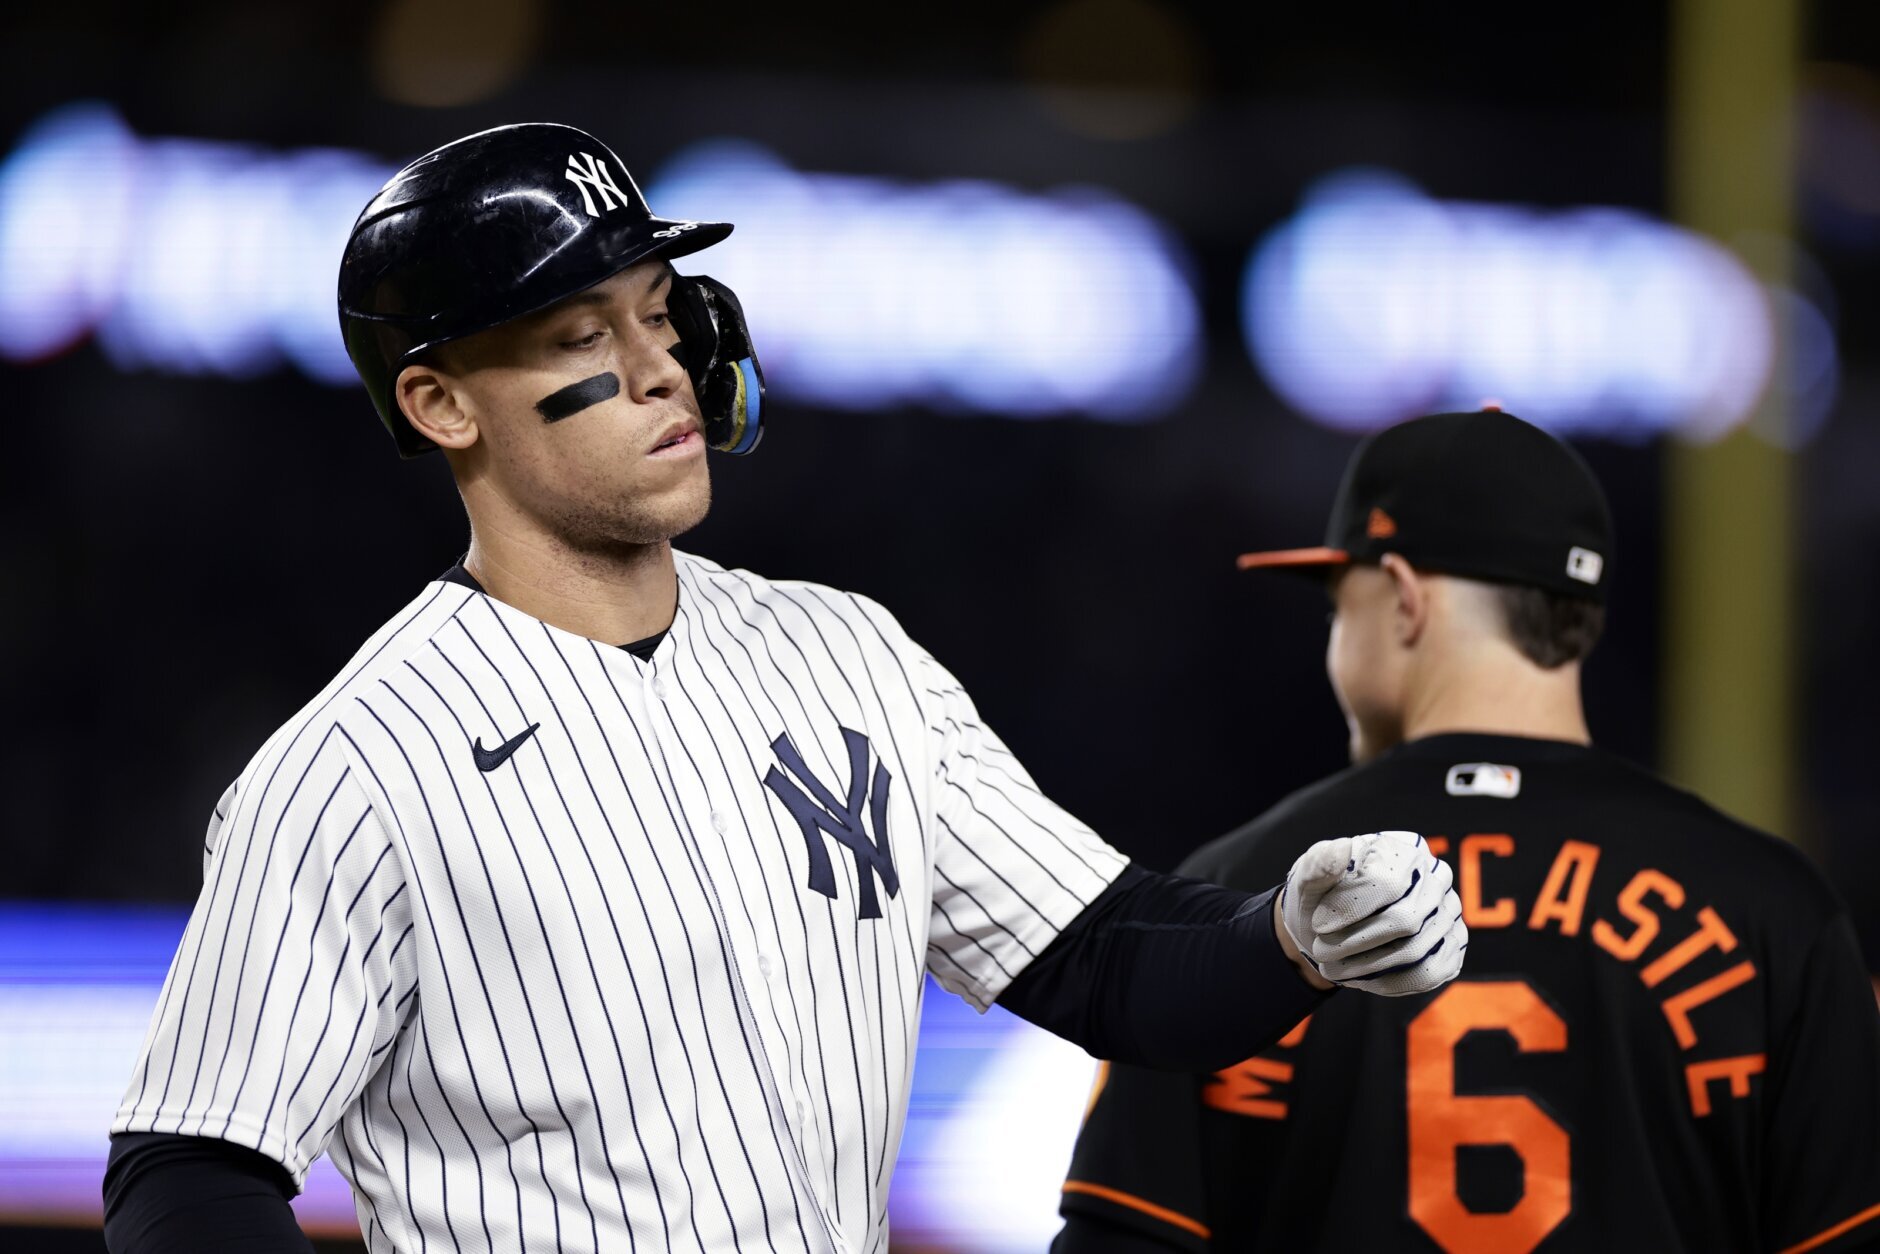 Aaron Judge has a homer in his 2nd game back to help the Yankees top the  Orioles 8-3